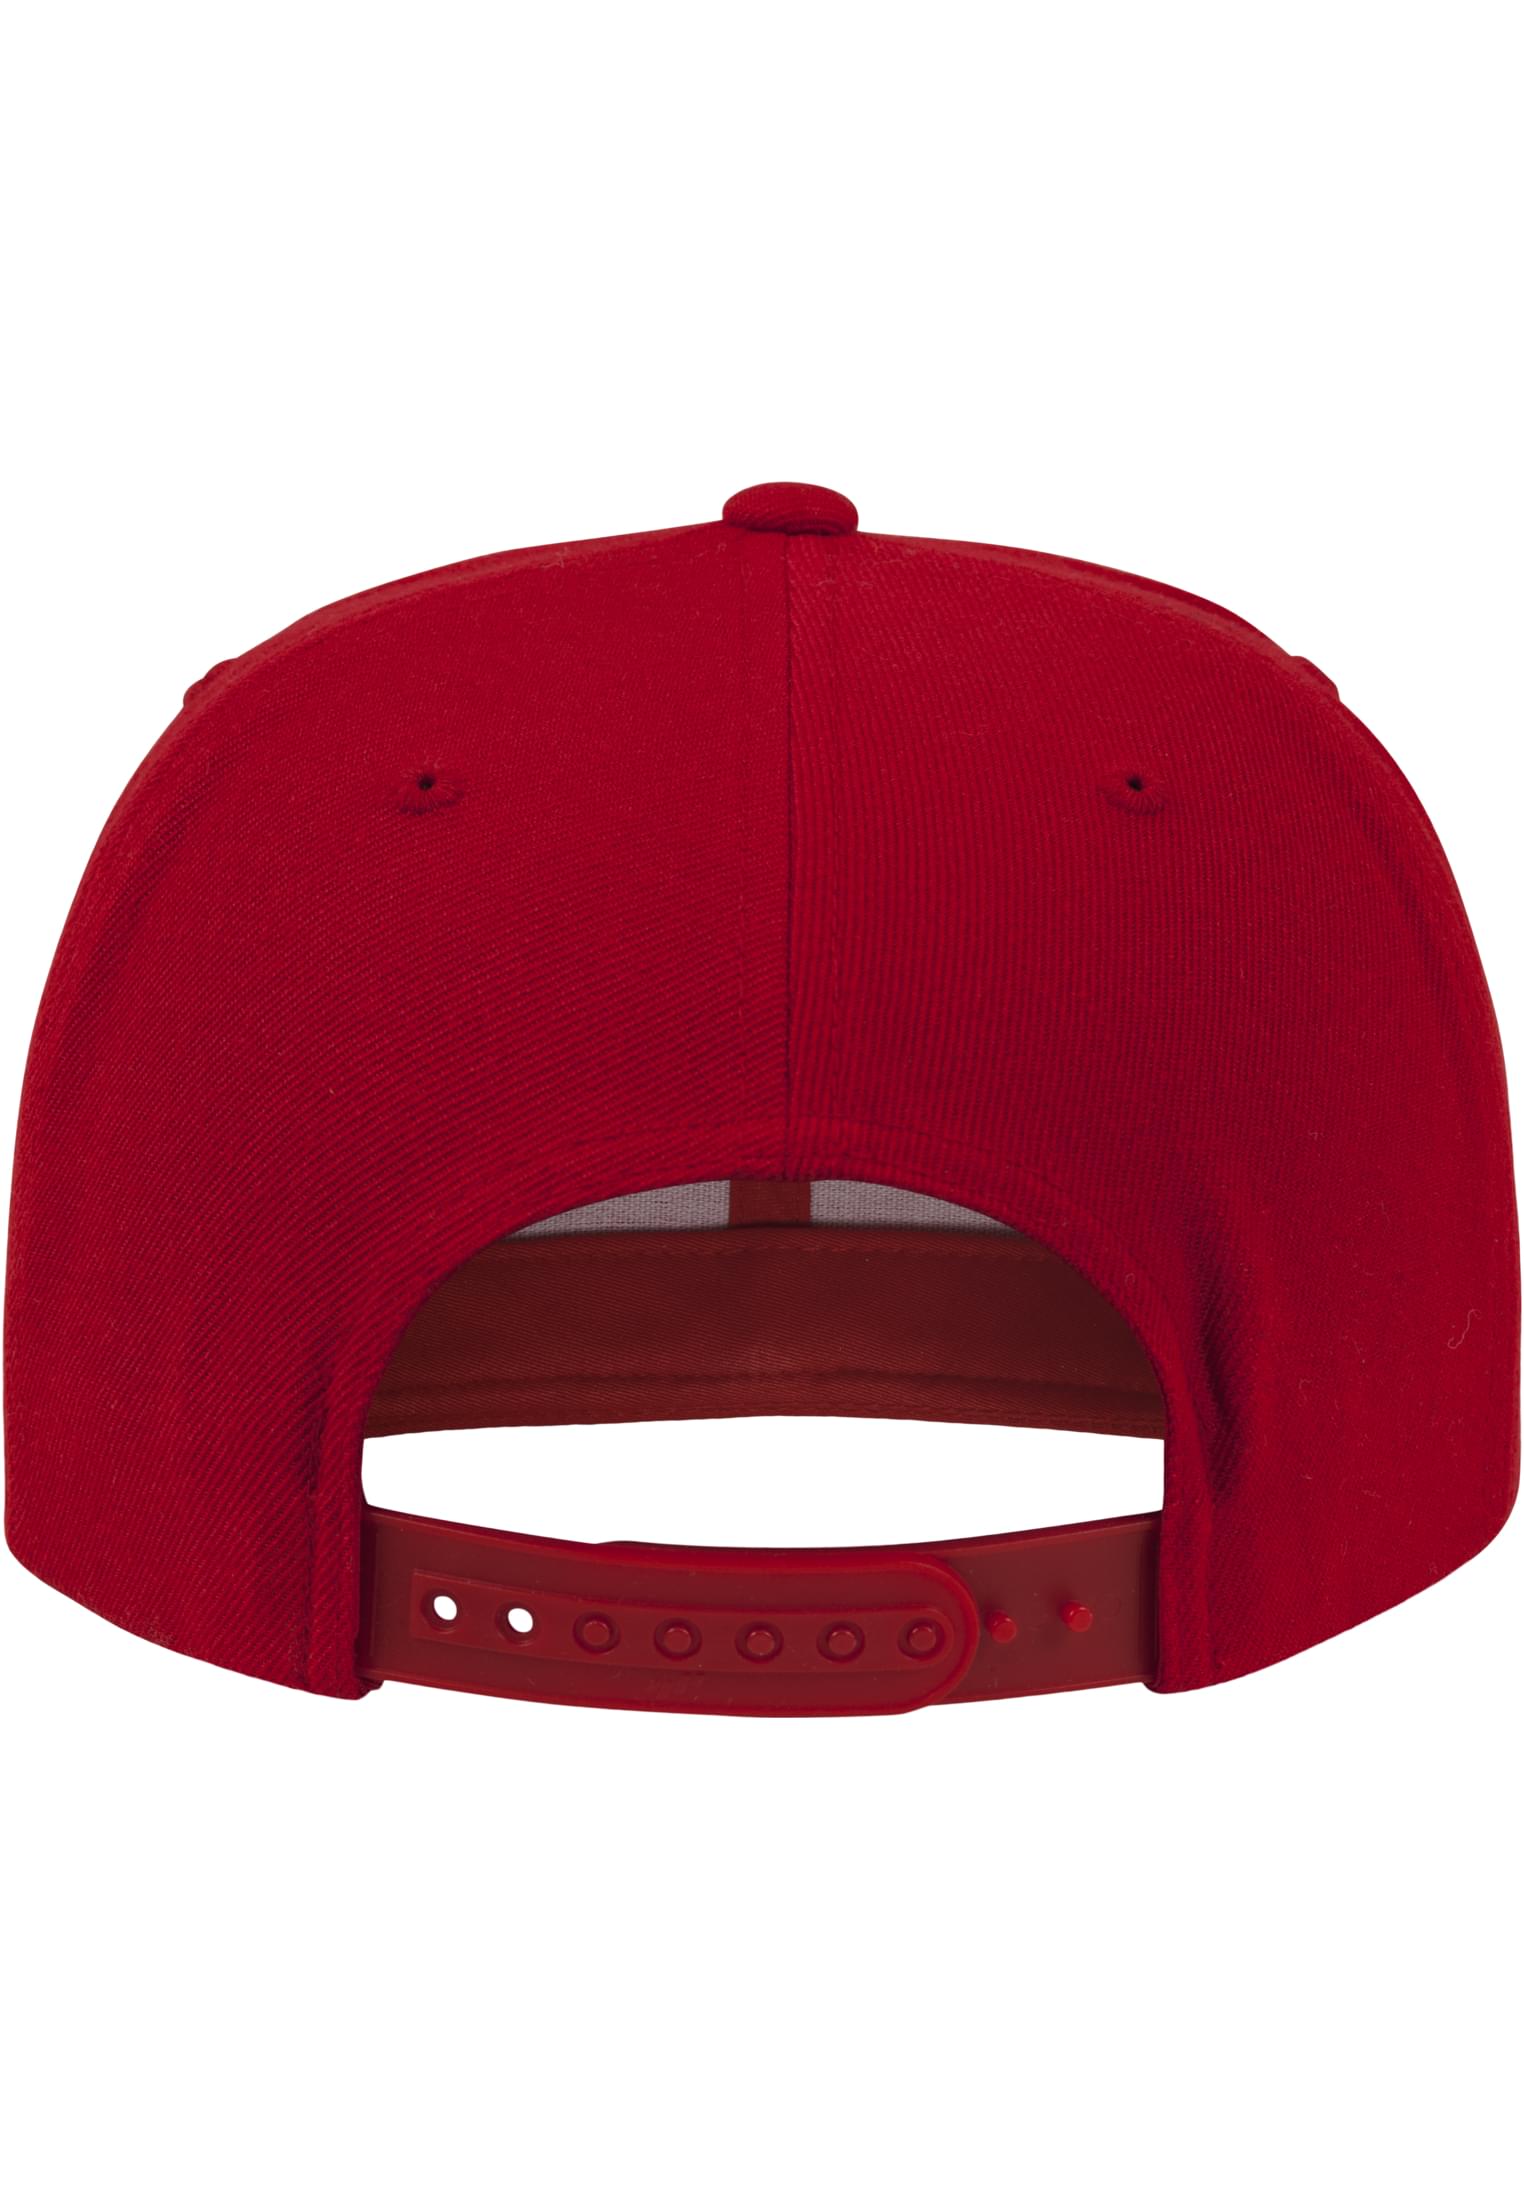 Kids Classic Snapback in Farbe red/red